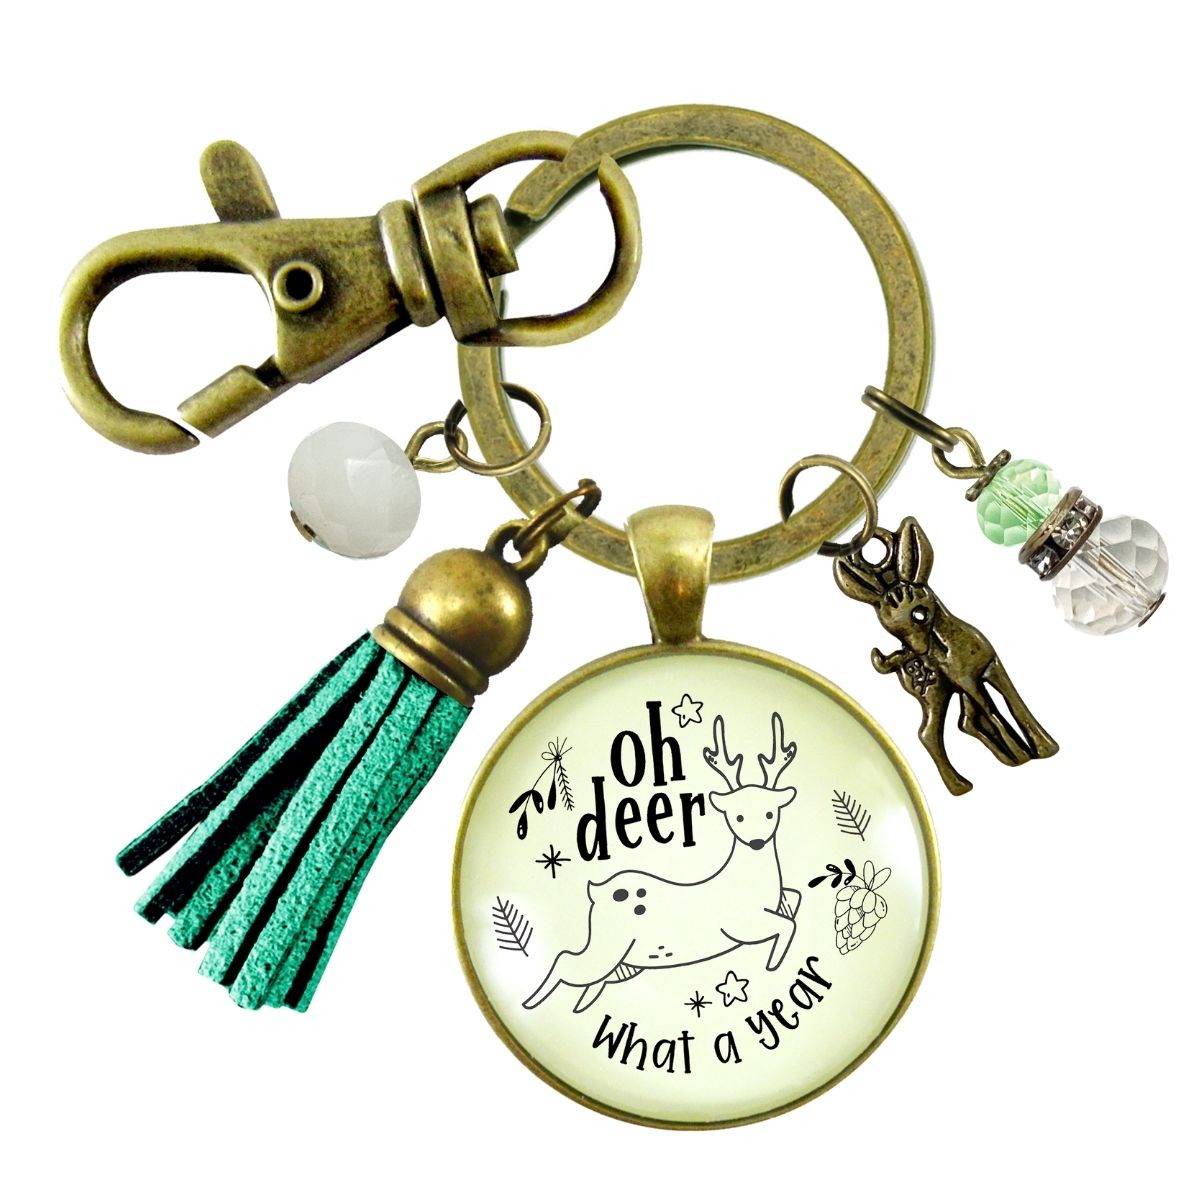 Deer Charm Keychain Oh Deer What a Year Message Jewelry Handmade Tassel Pendant Holiday New Year's Key Ring Gift   - Gutsy Goodness Handmade Jewelry